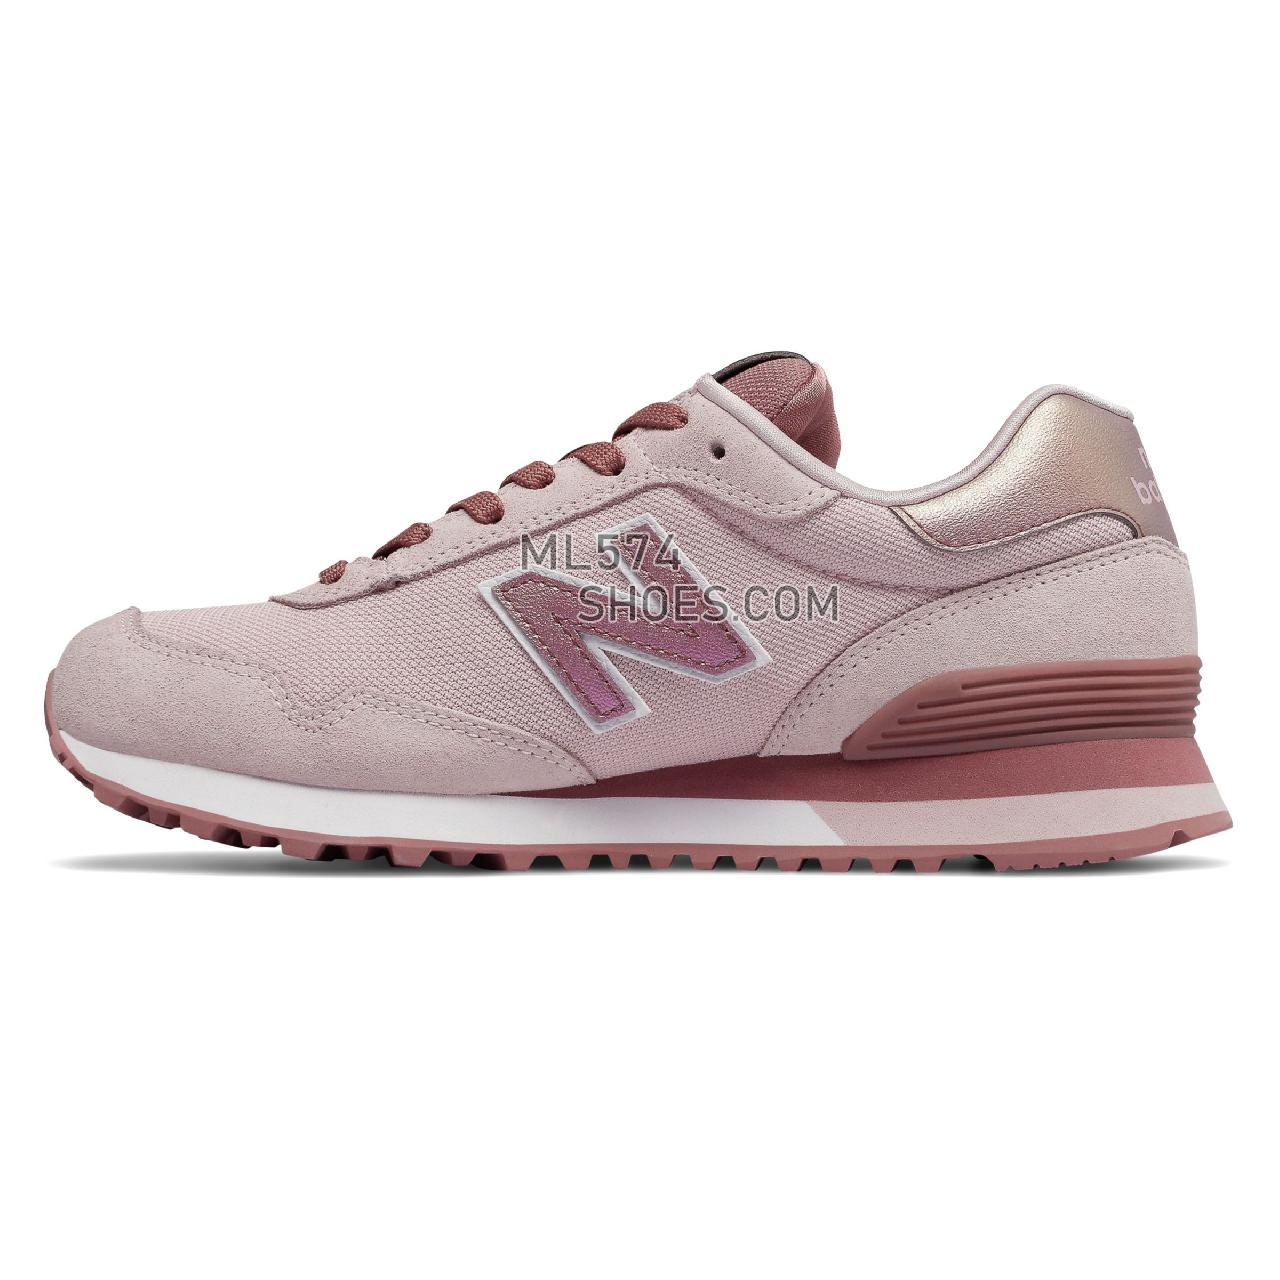 New Balance 515 Classic - Women's Classic Sneakers - Conch Shell with Dark Oxide - WL515CSC